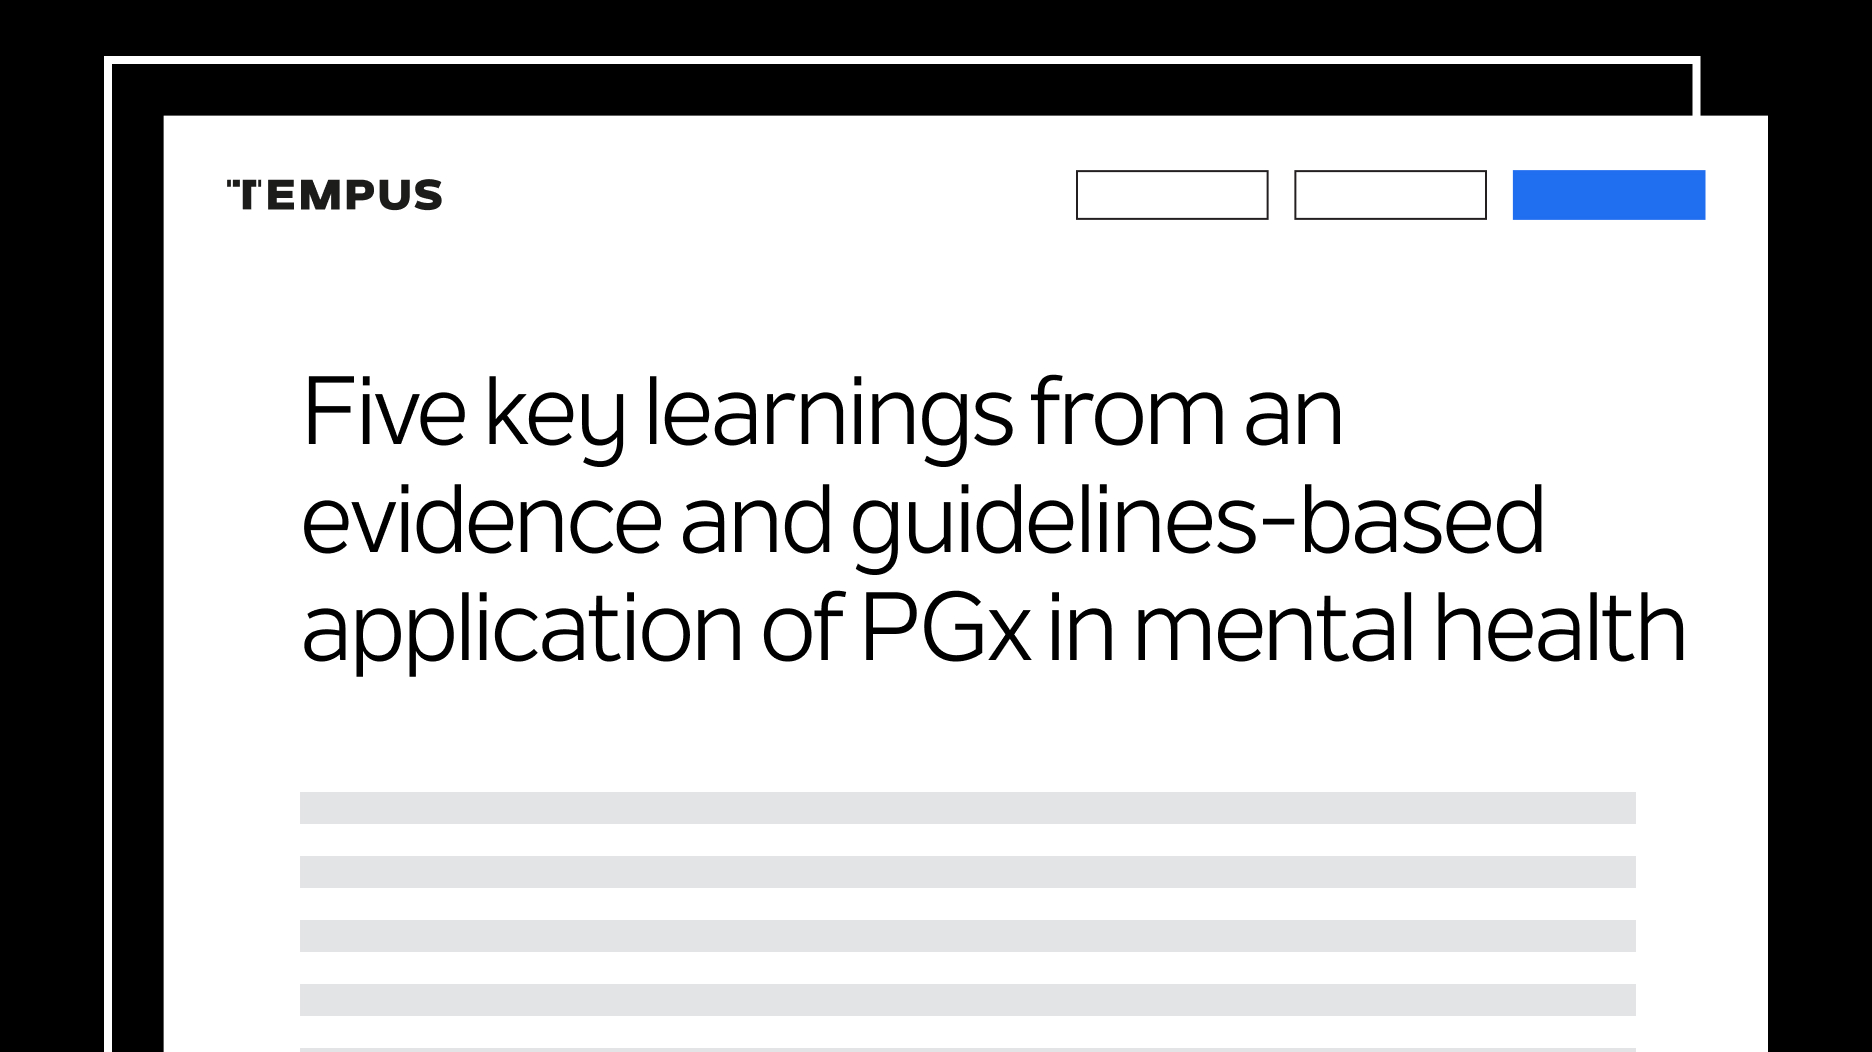 Five key learnings from an evidence and guidelines-based application of PGx in mental health